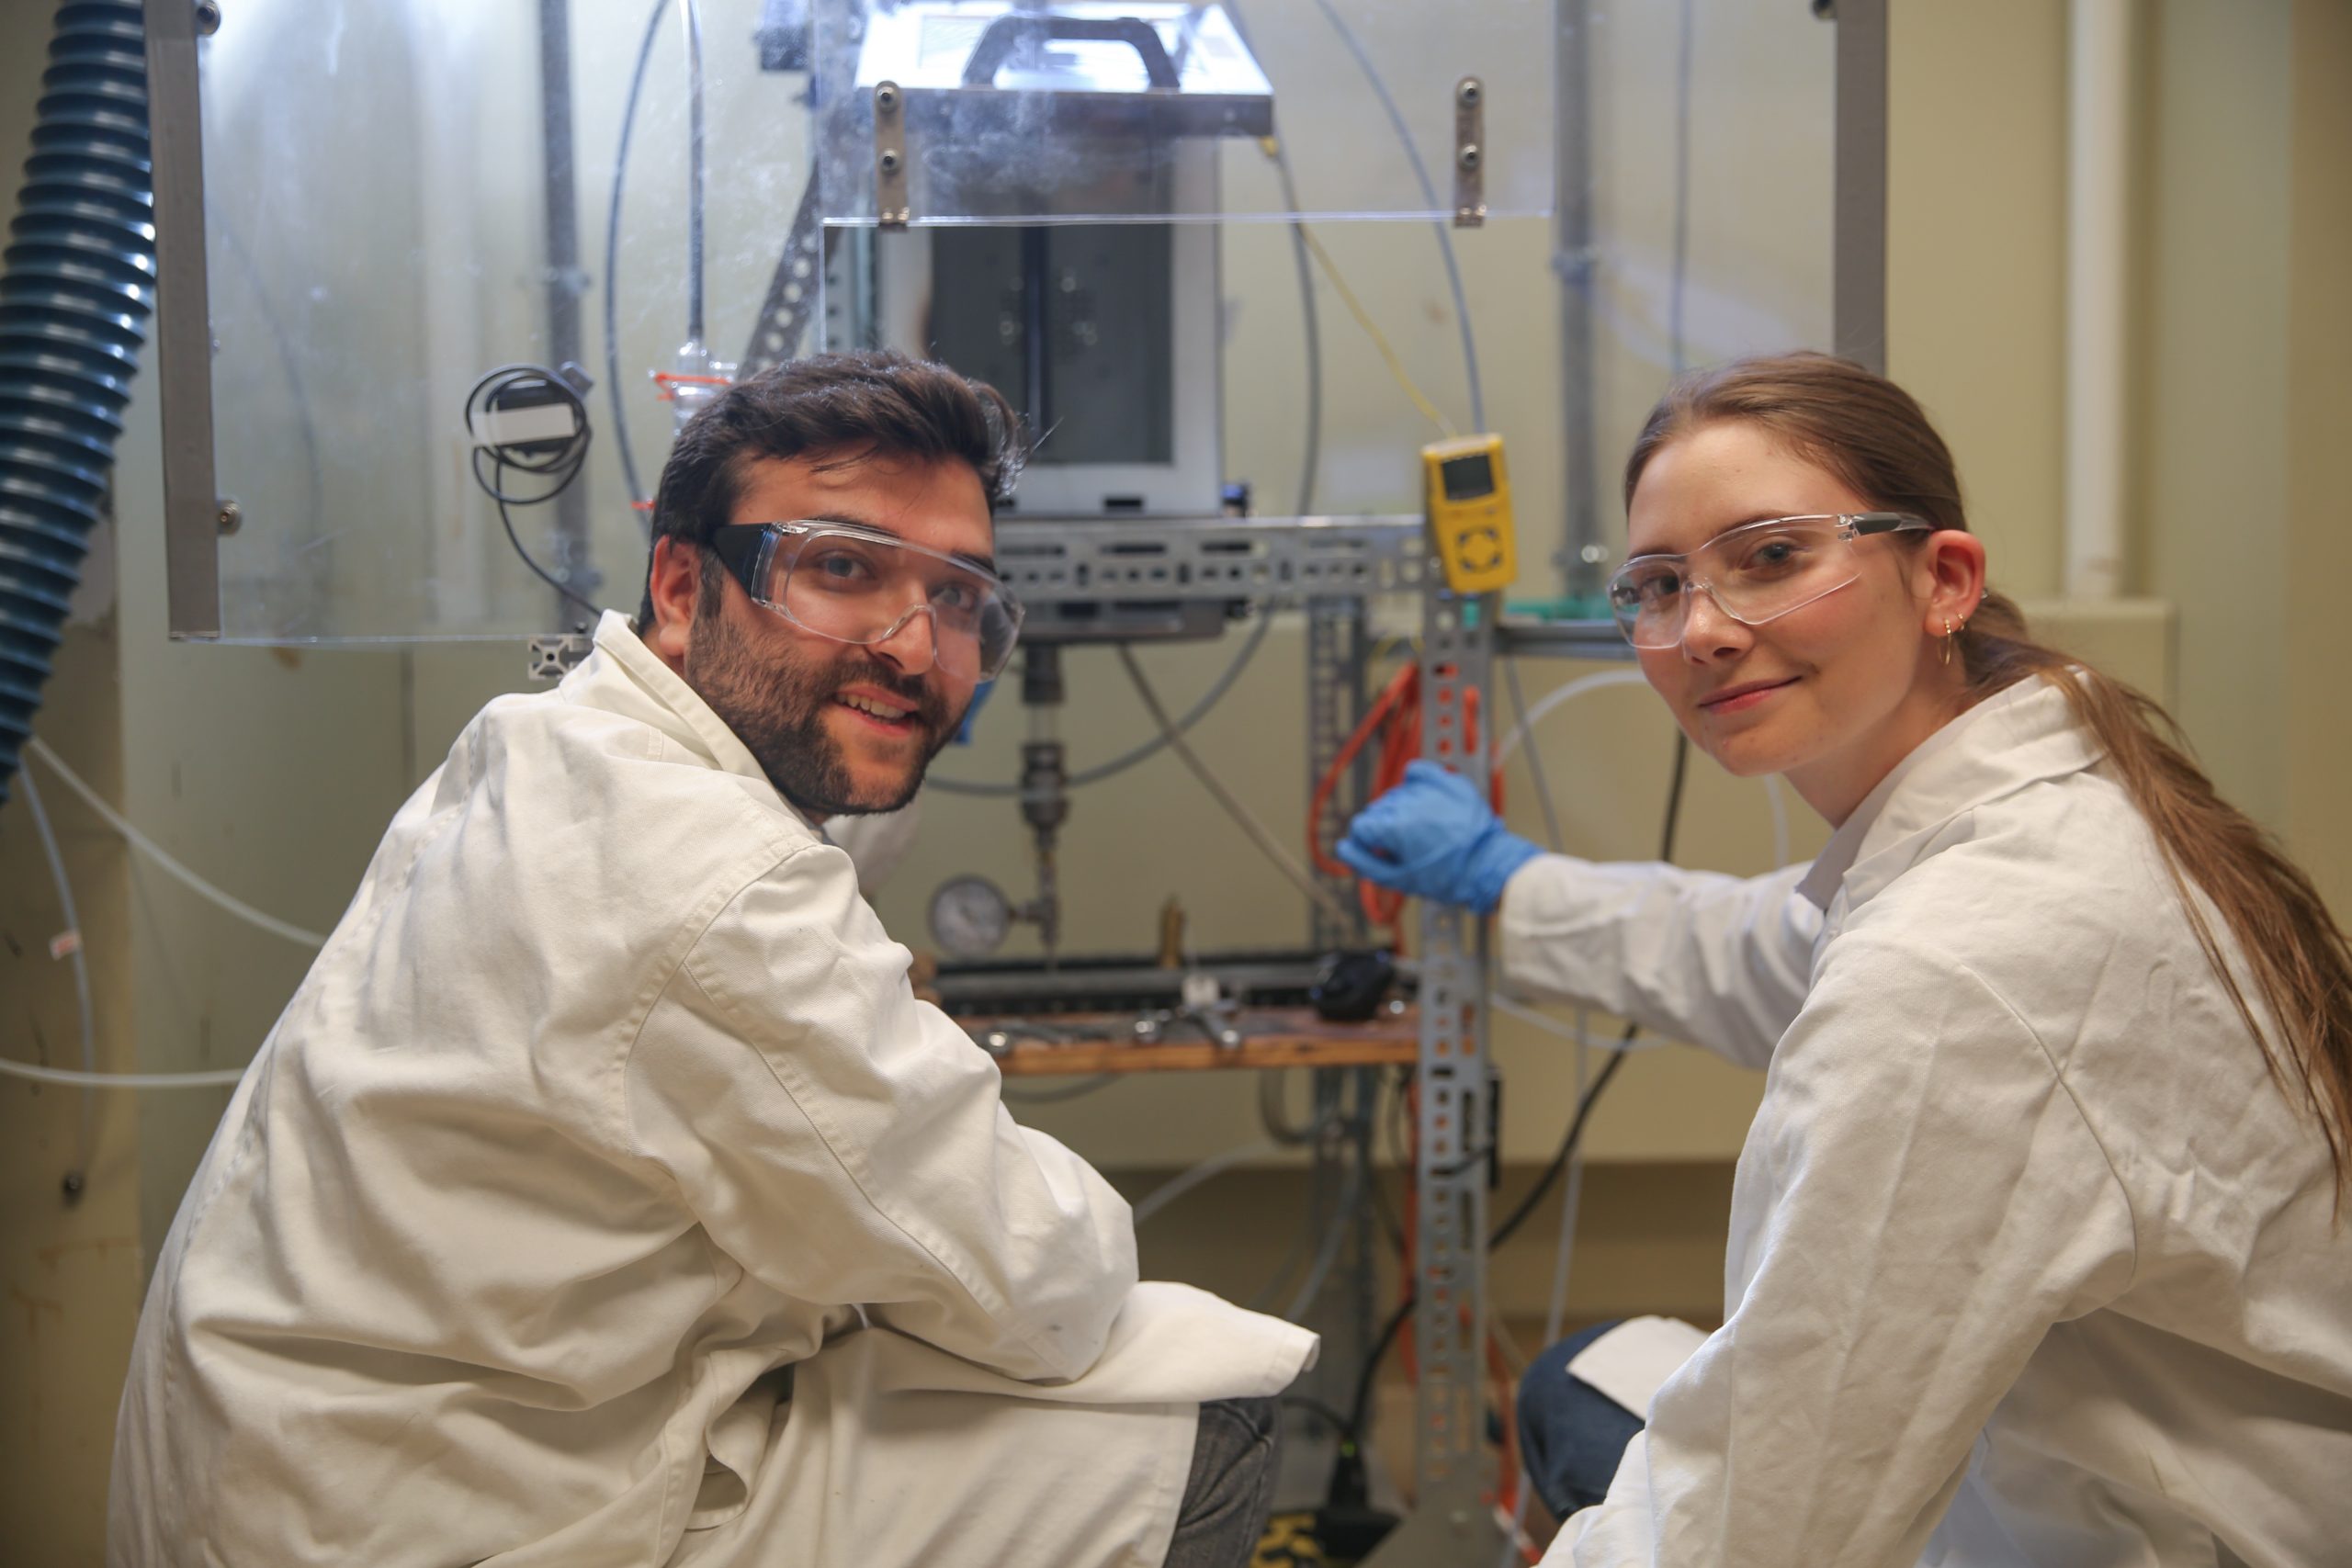 Two researchers wearing protective lab coats, gloves and googles look back while working in a laboratory.